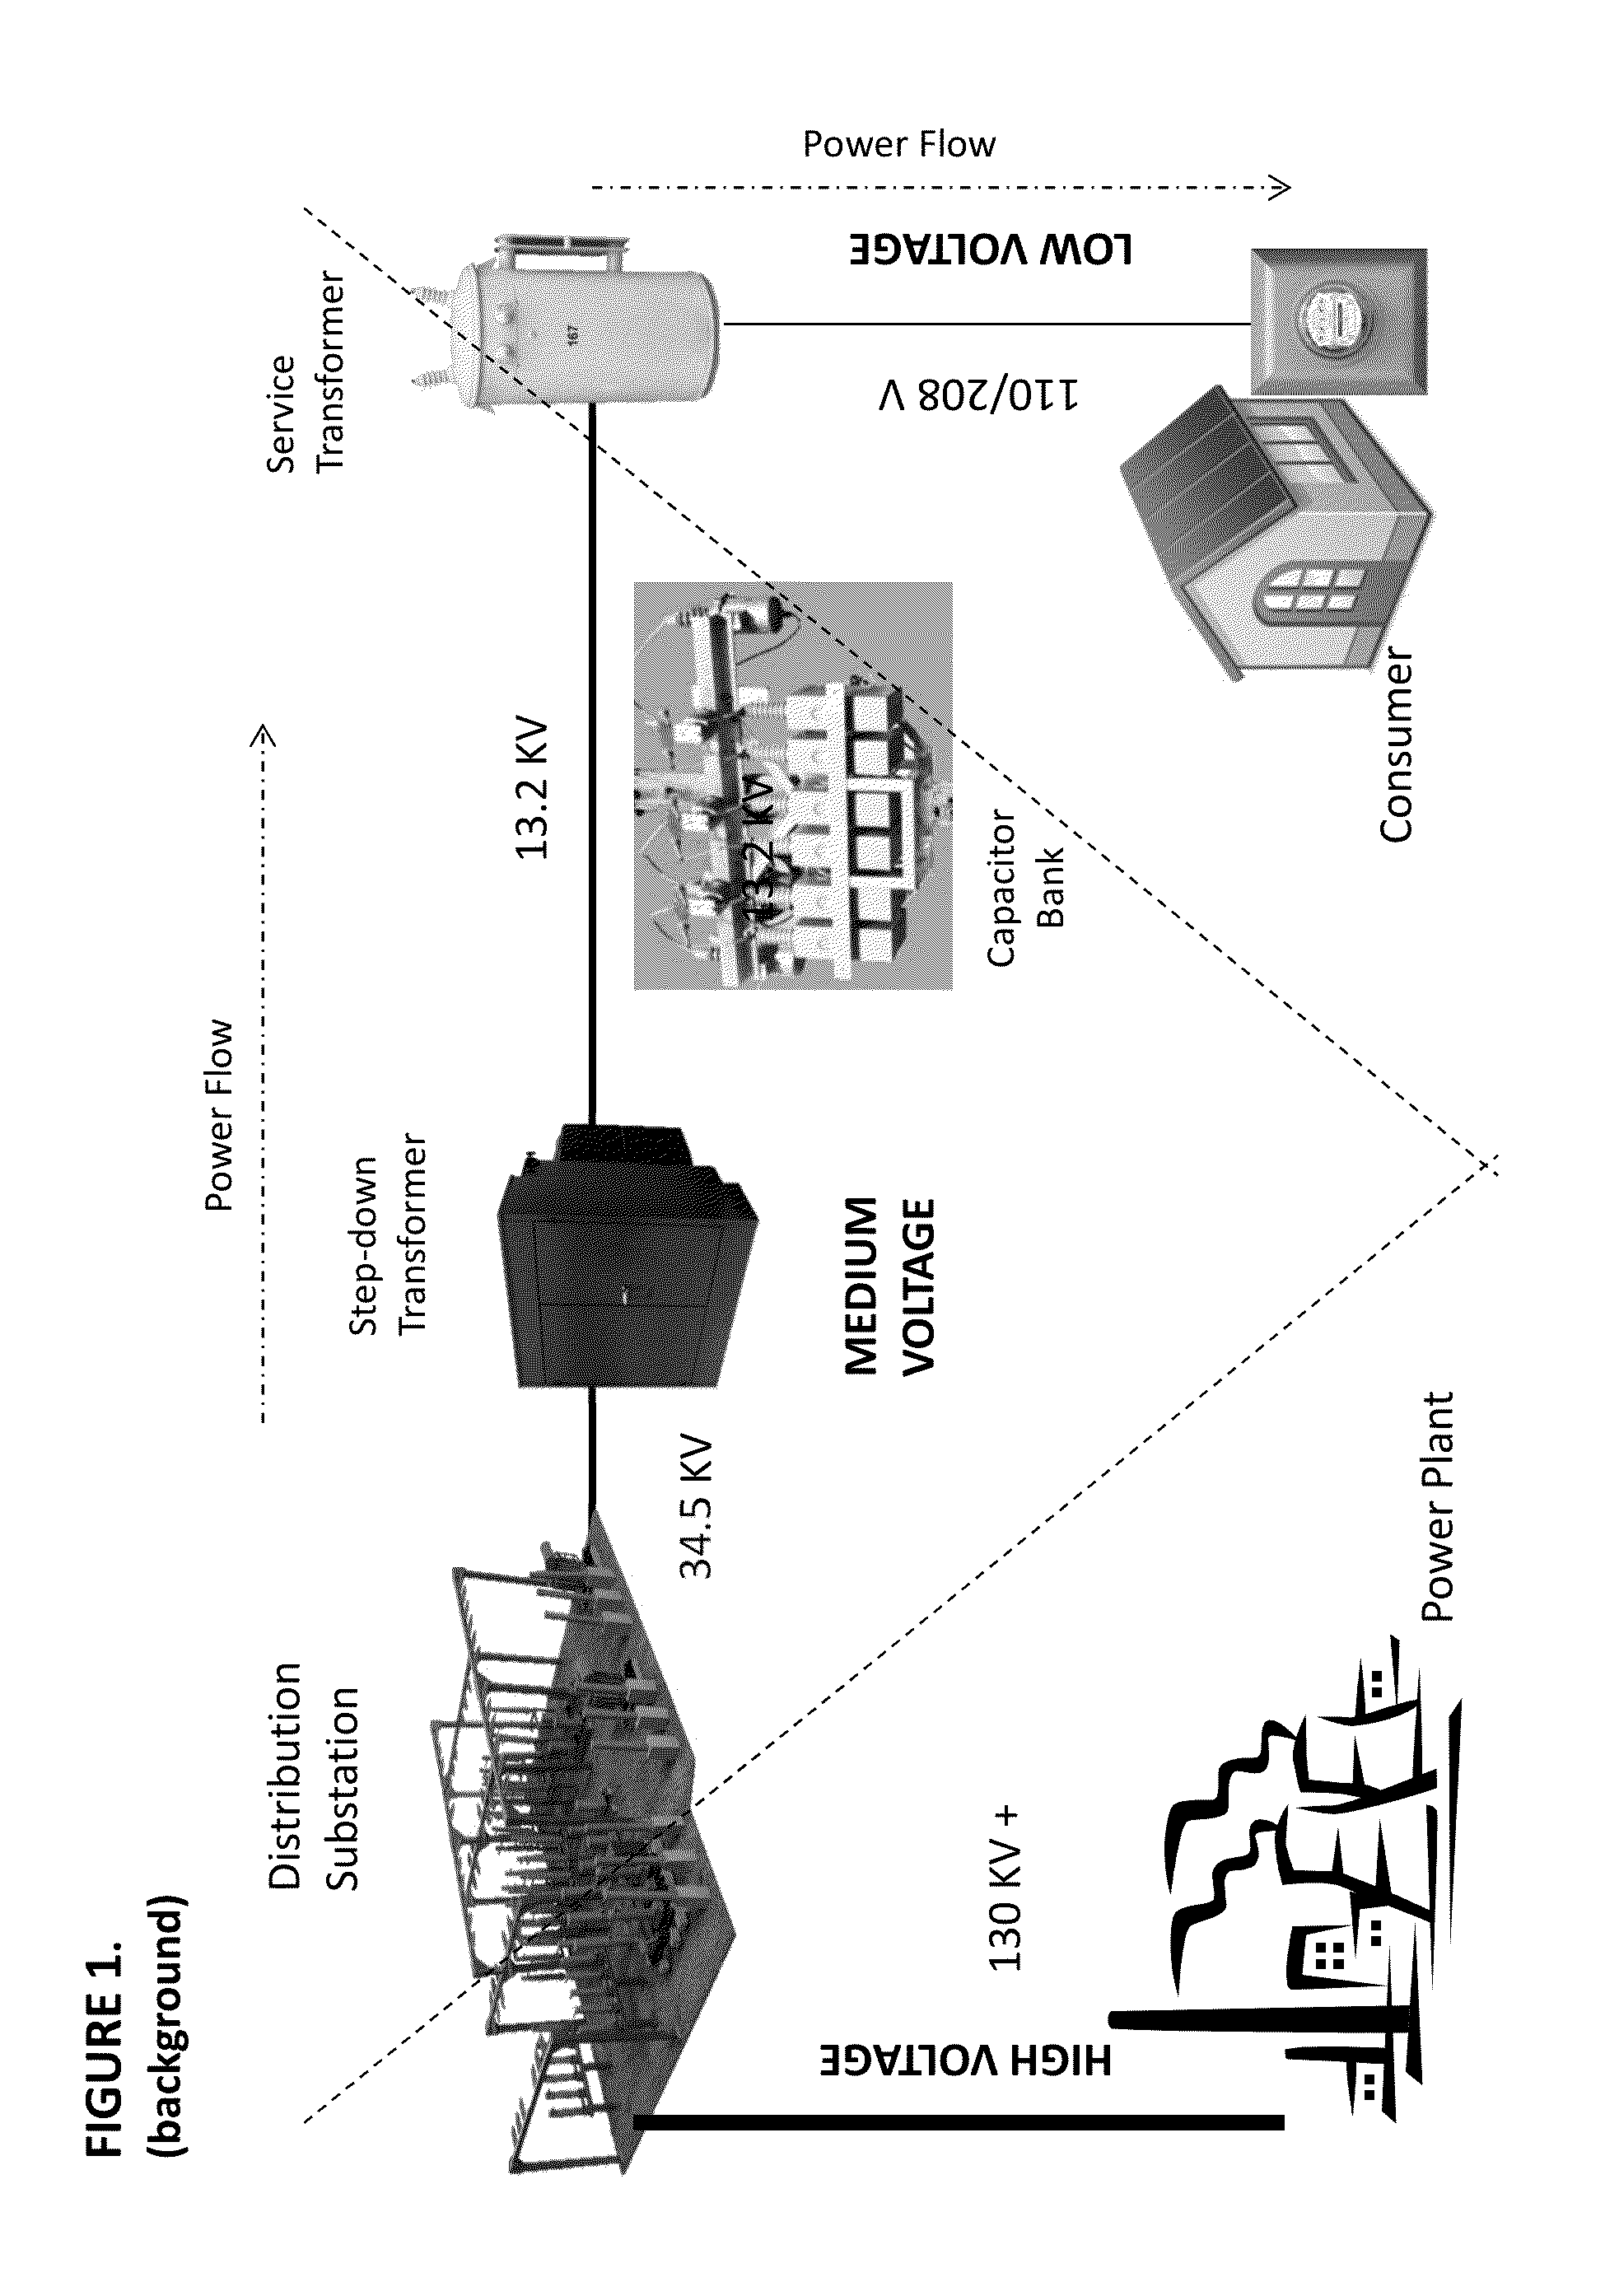 Methods for analyzing and optimizing the performance of a data collection network on an electrical distribution grid